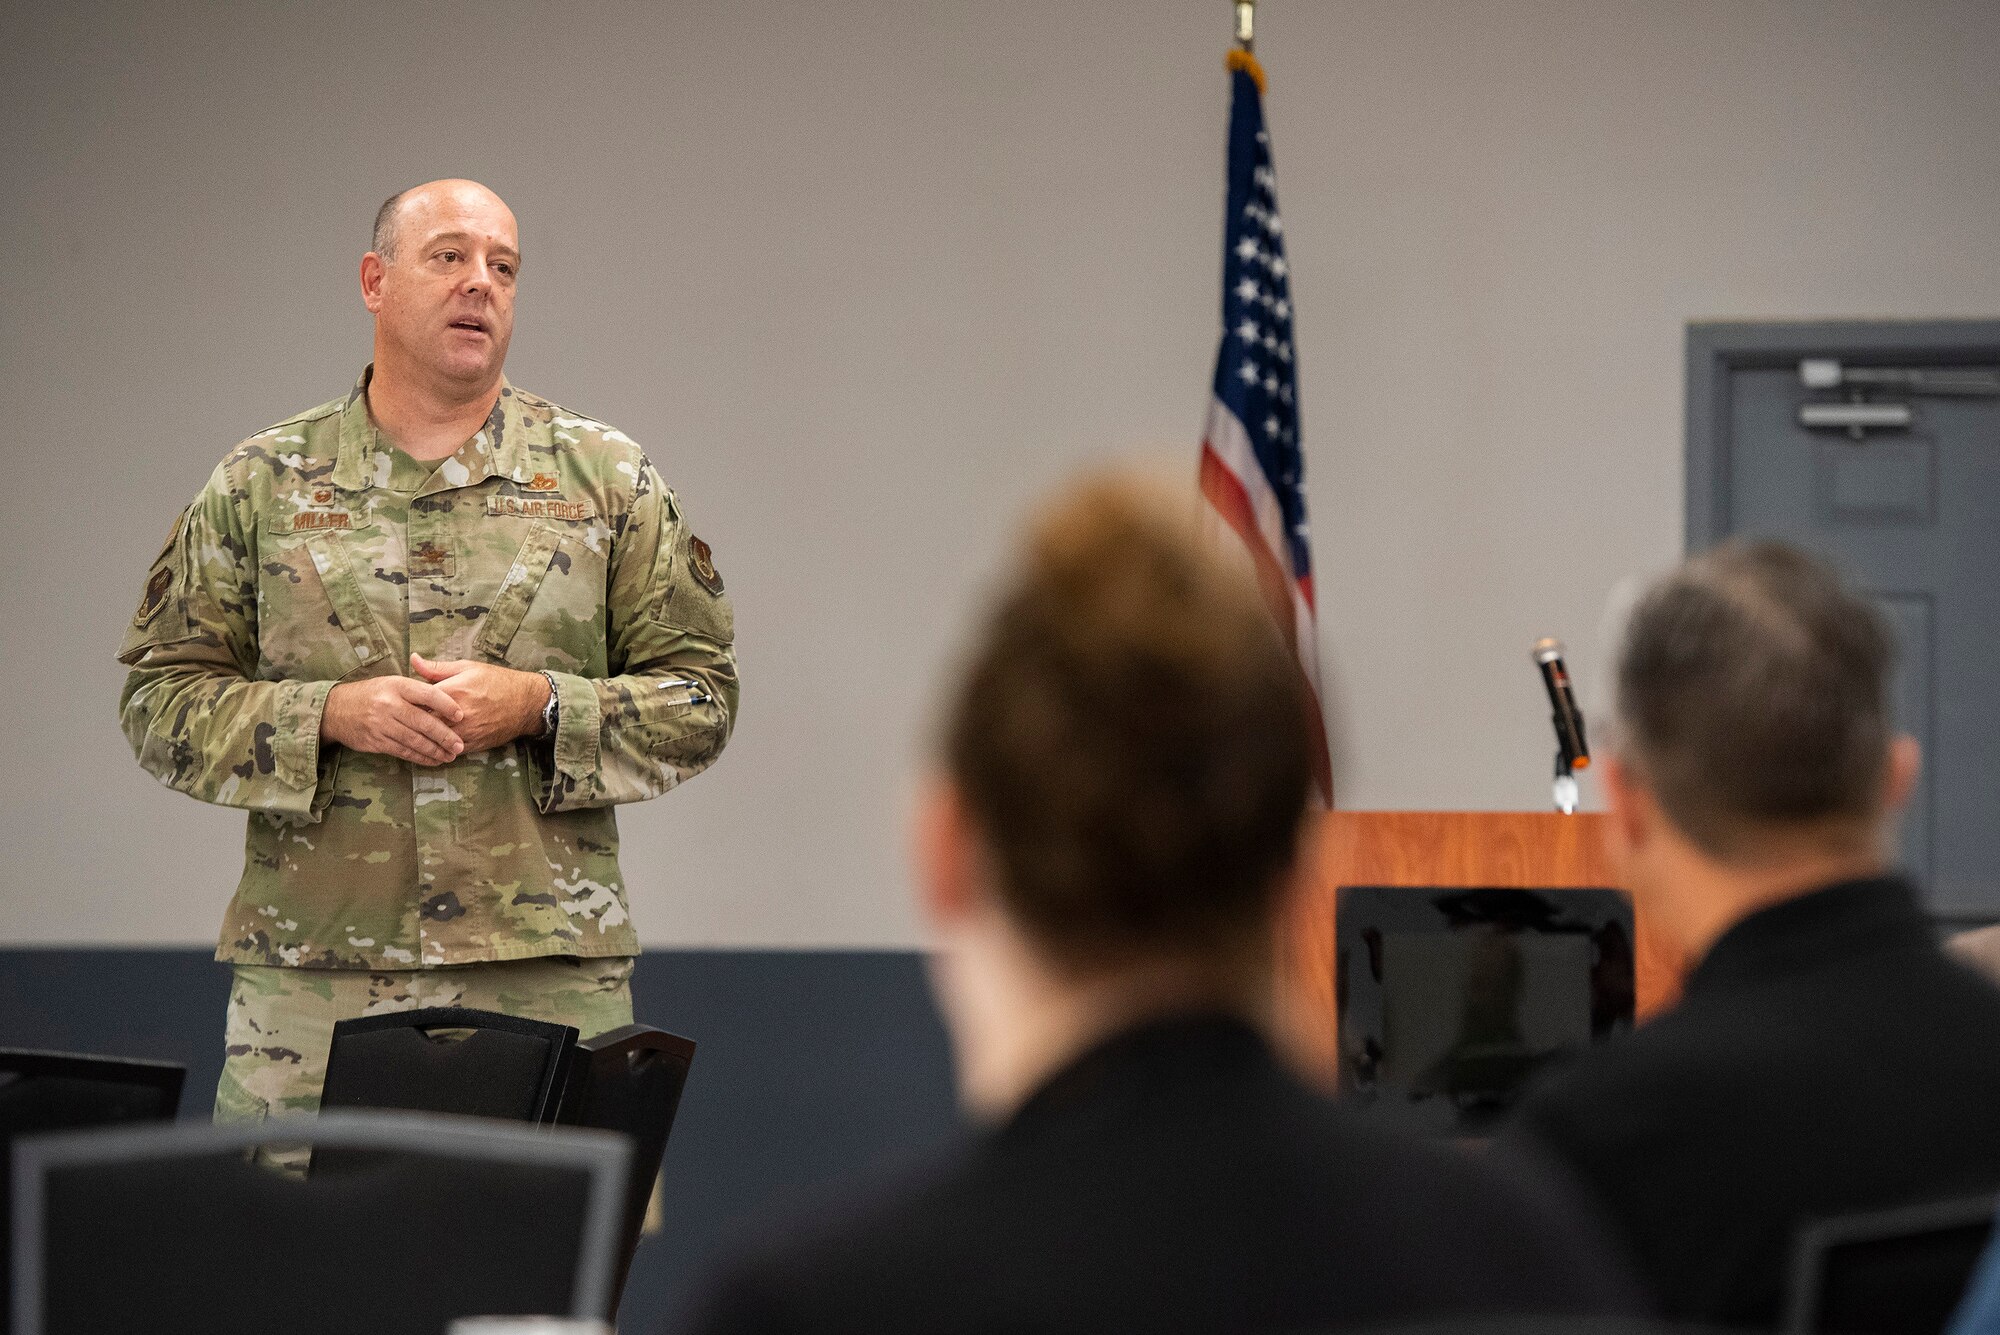 Col. Patrick Miller, 88th Air Base Wing and installation commander, welcomes Leadership Dayton members to Wright-Patterson Air Force Base on July 14. Leadership Dayton is designed to identify, educate and motivate a network of local leaders and increase their capacity to serve the Dayton region. (U.S. Air Force photo by R.J. Oriez)